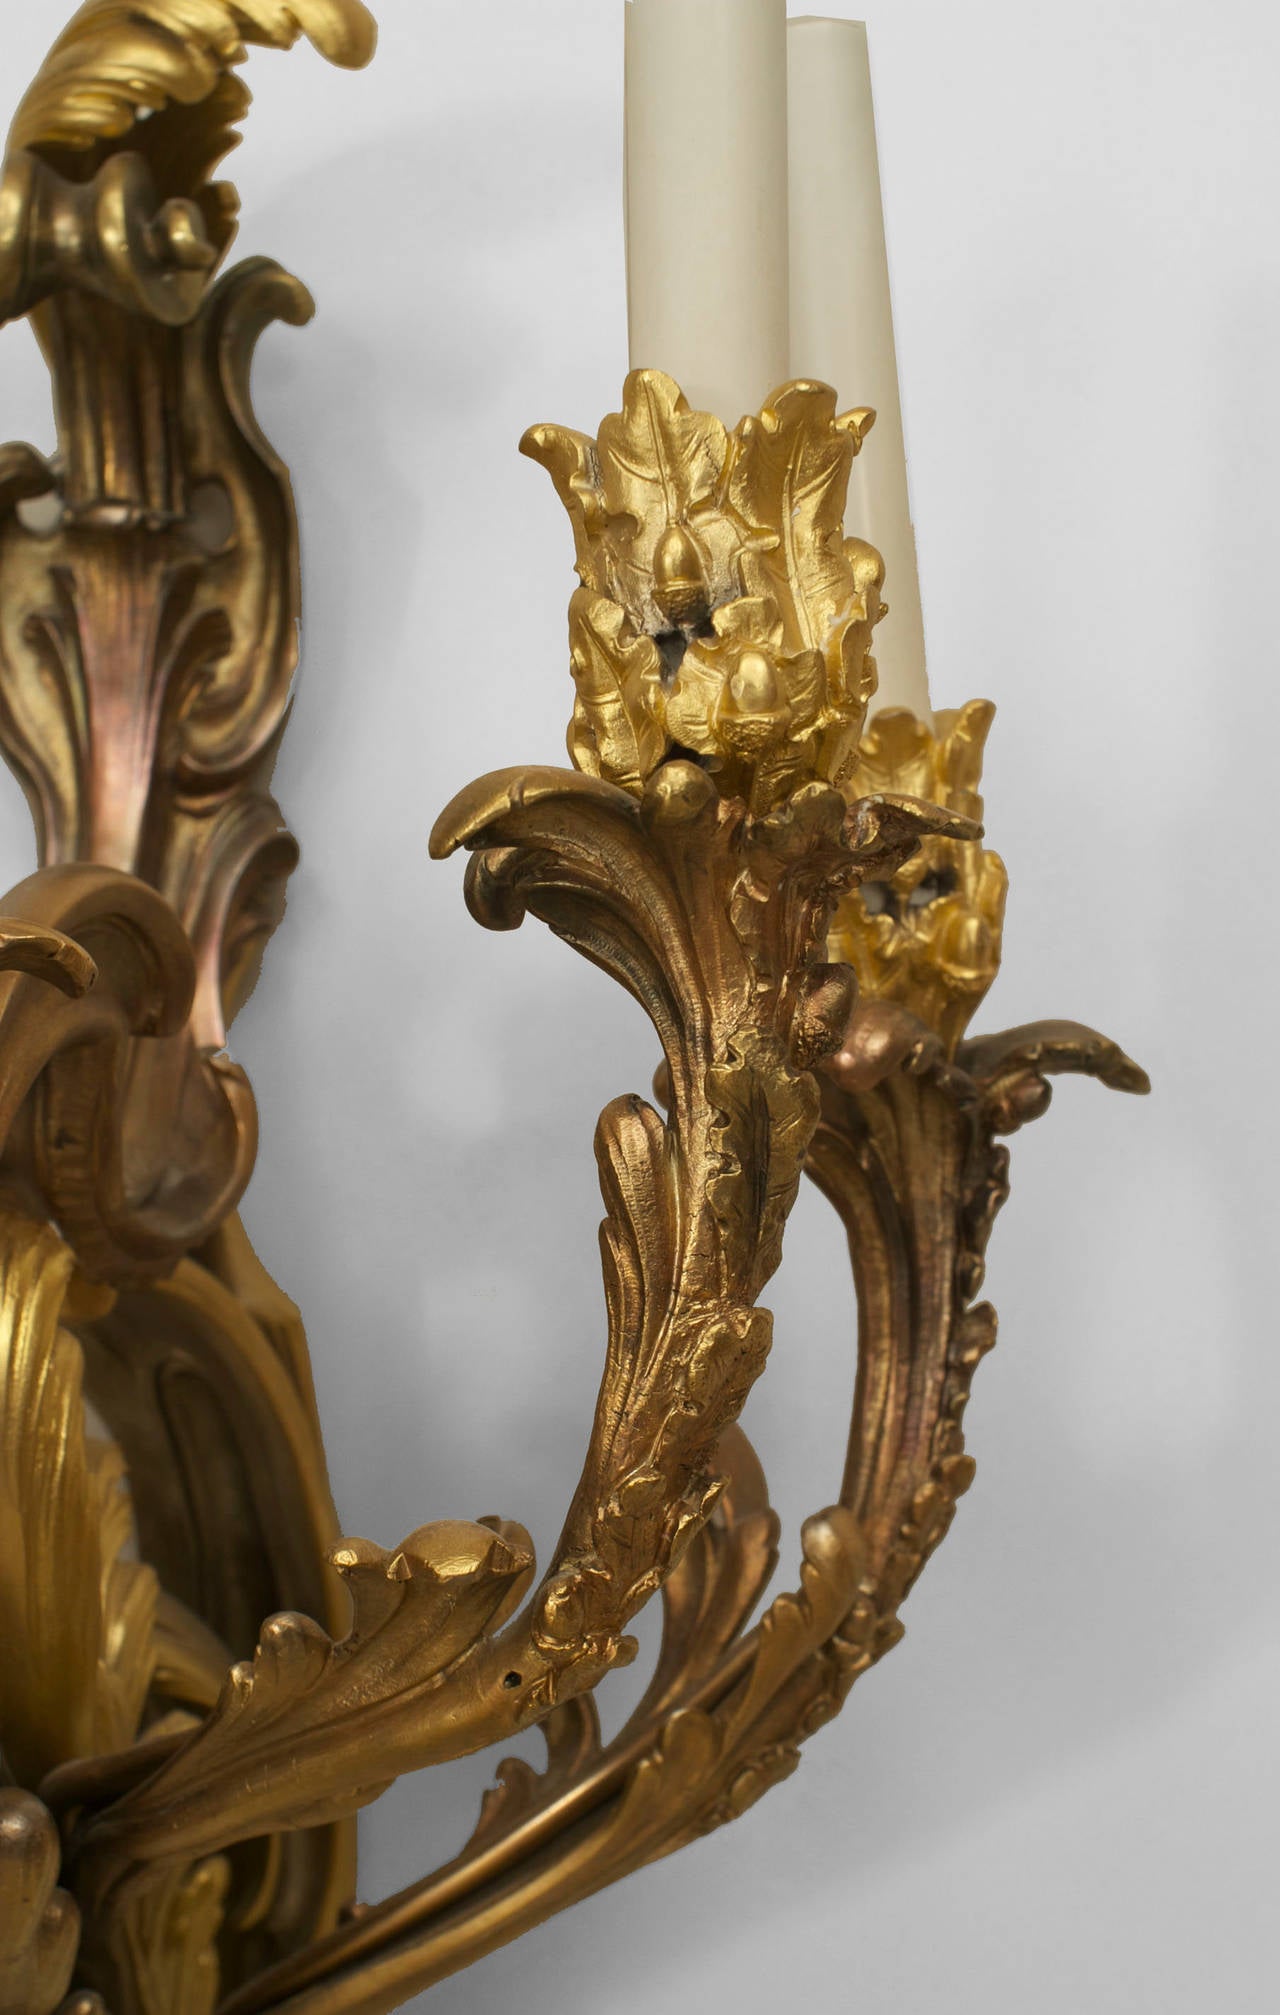 French Louis XV style (19/20th Century) gilt bronze wall sconce with five arms emanating from a scroll back with floral decoration.
